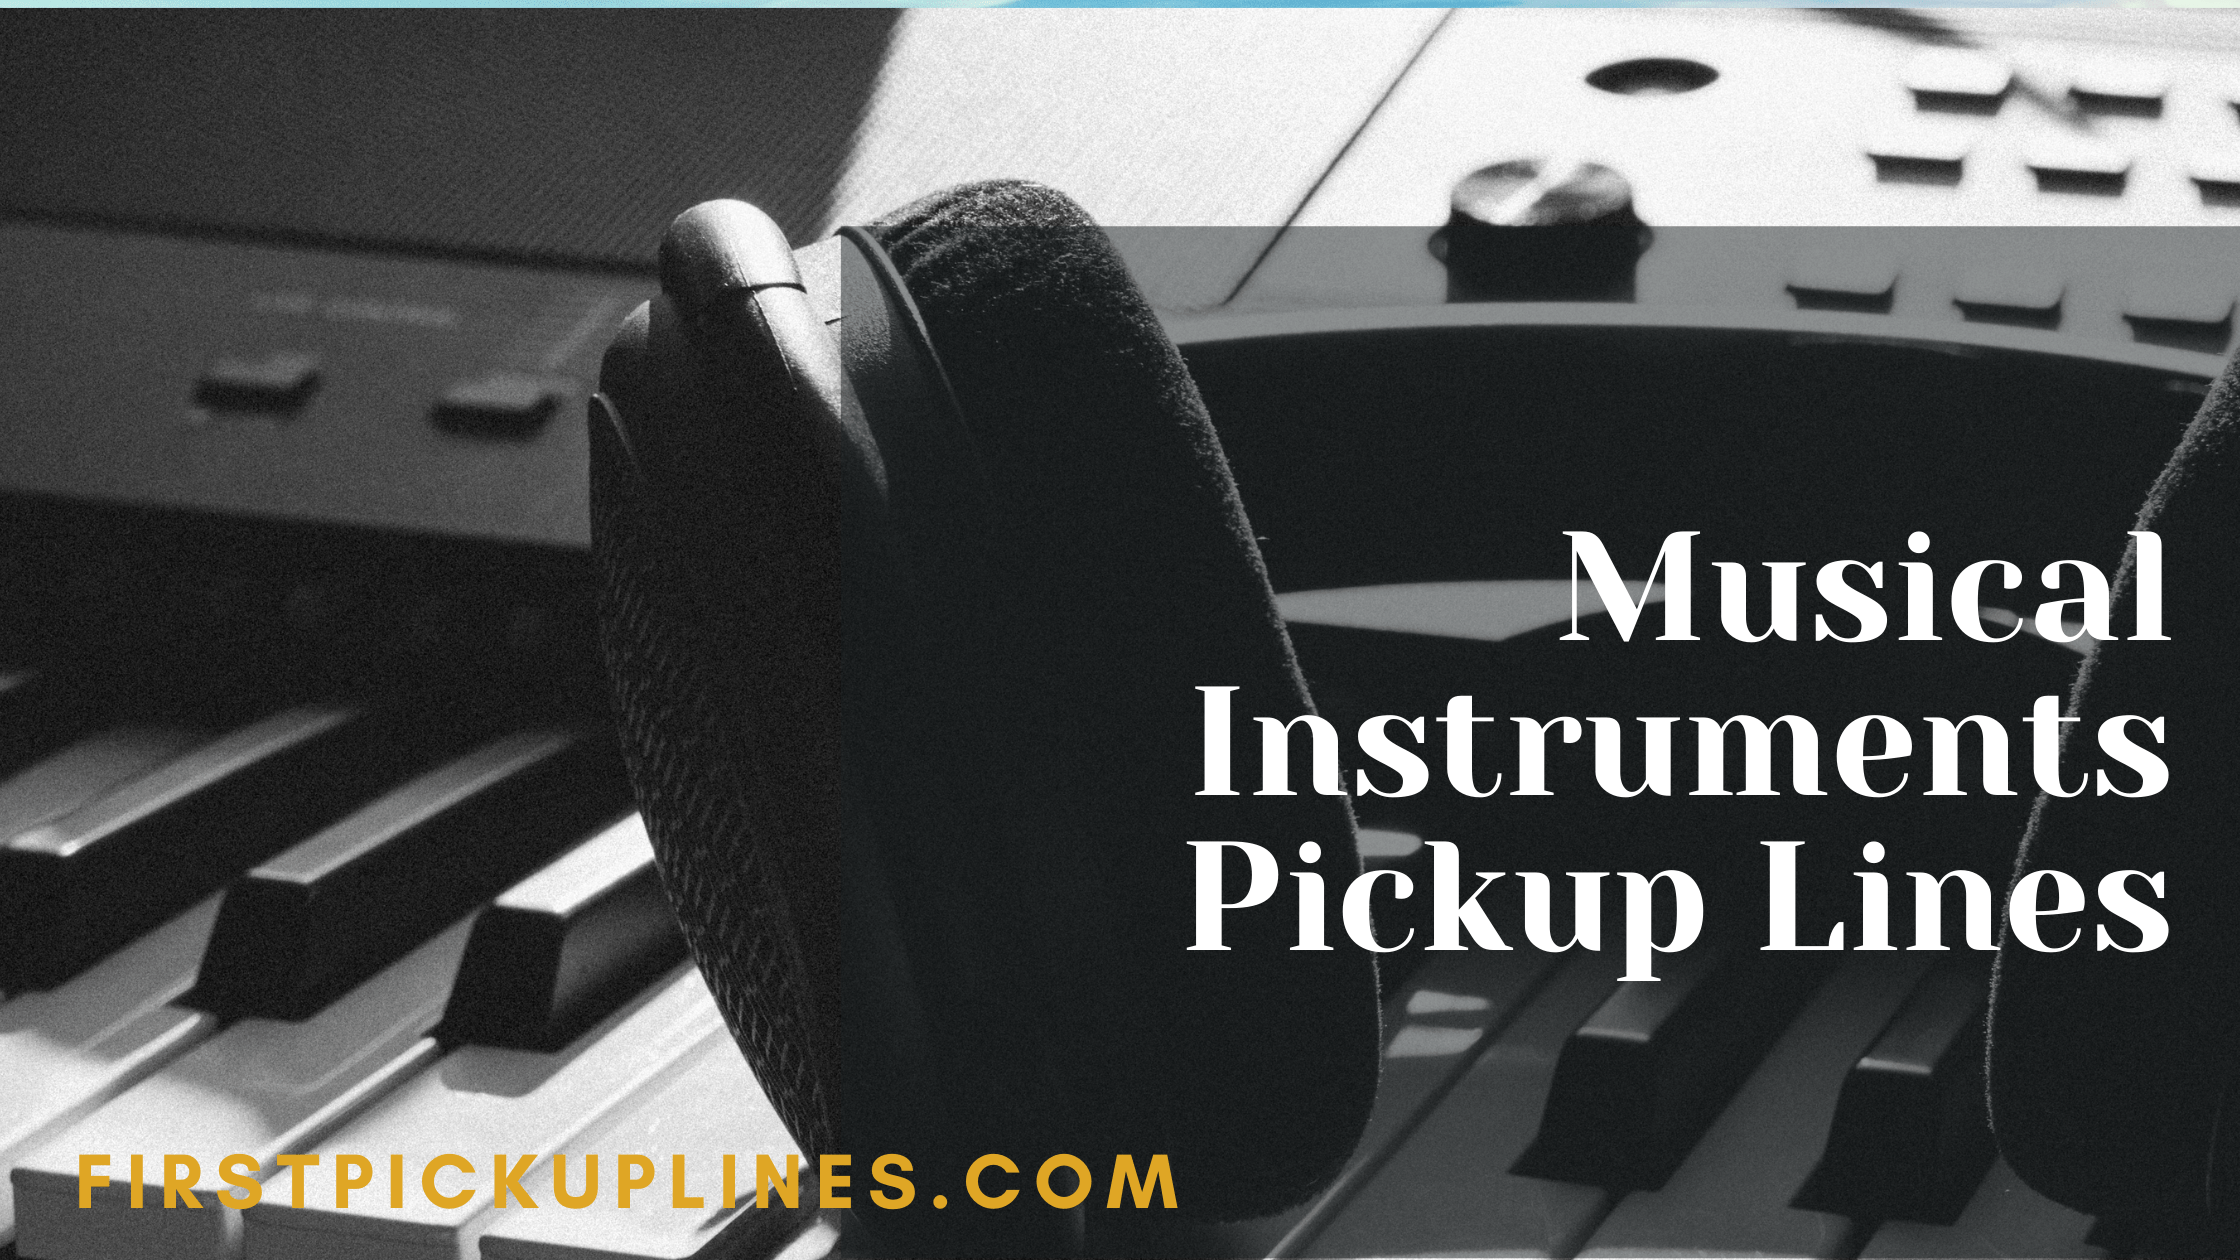 Musical Instruments Pickup Lines